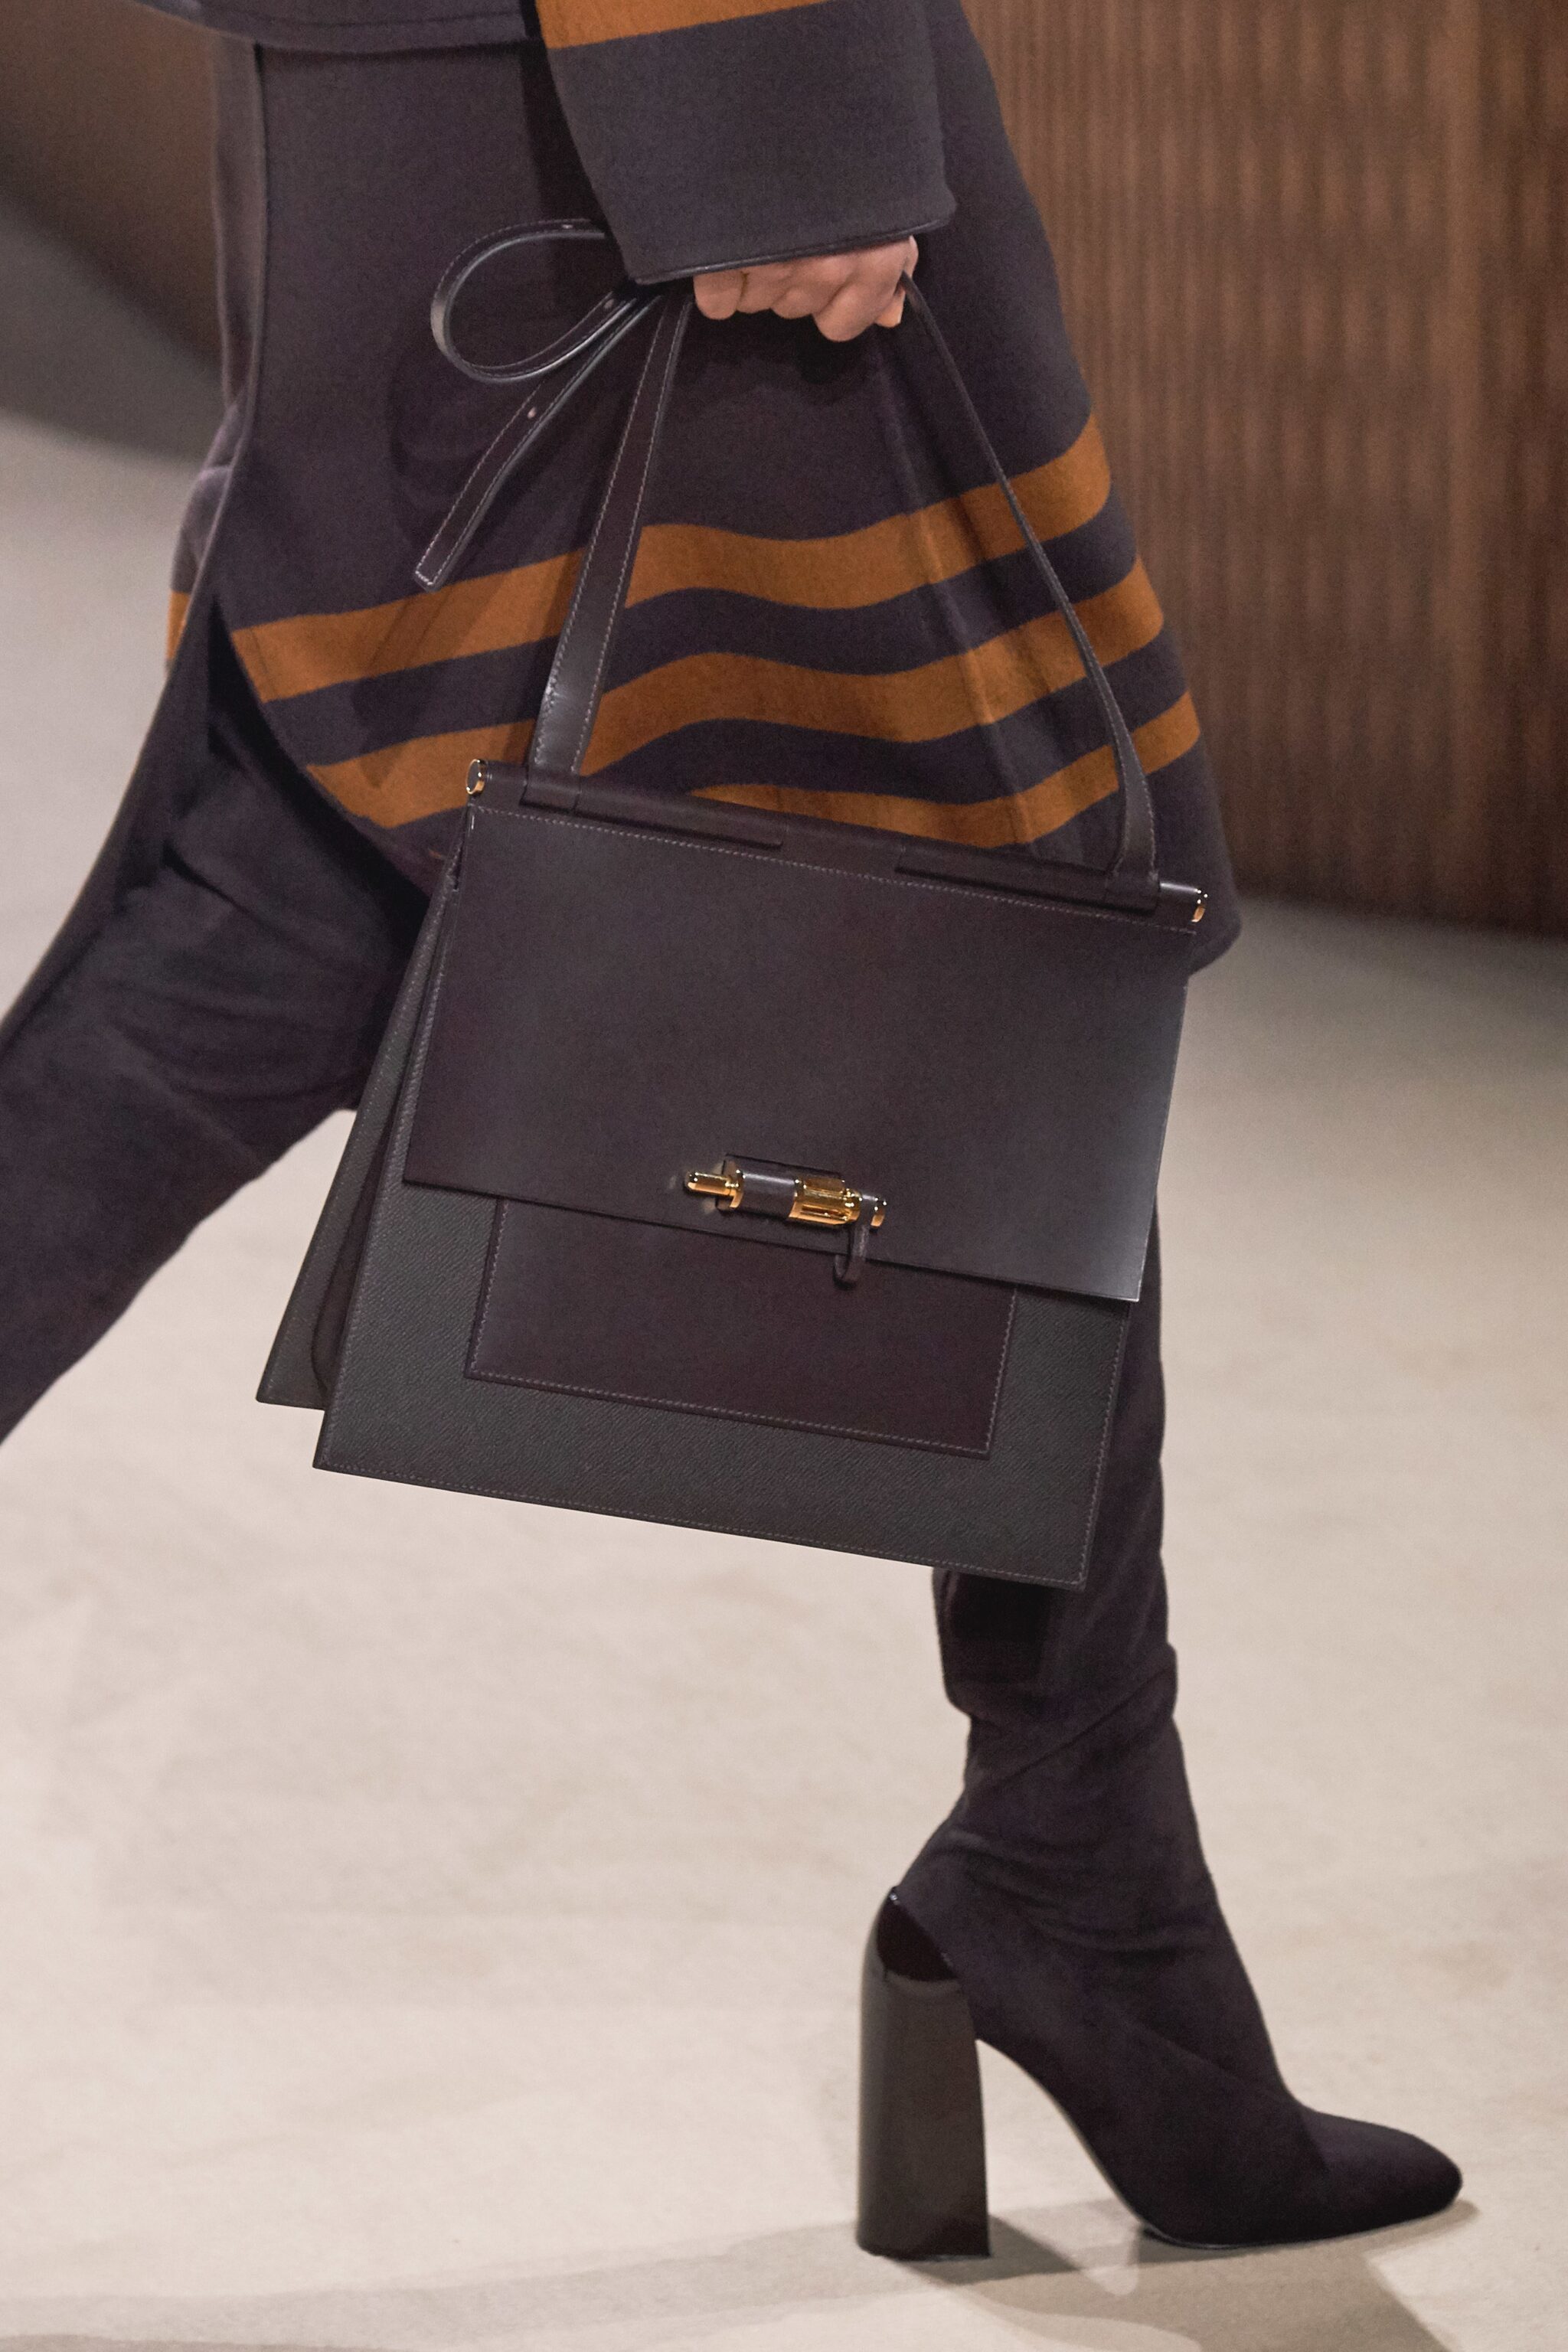 Hermes Fall/Winter 2019 Runway featuring Mini Constance Bag | Spotted Fashion